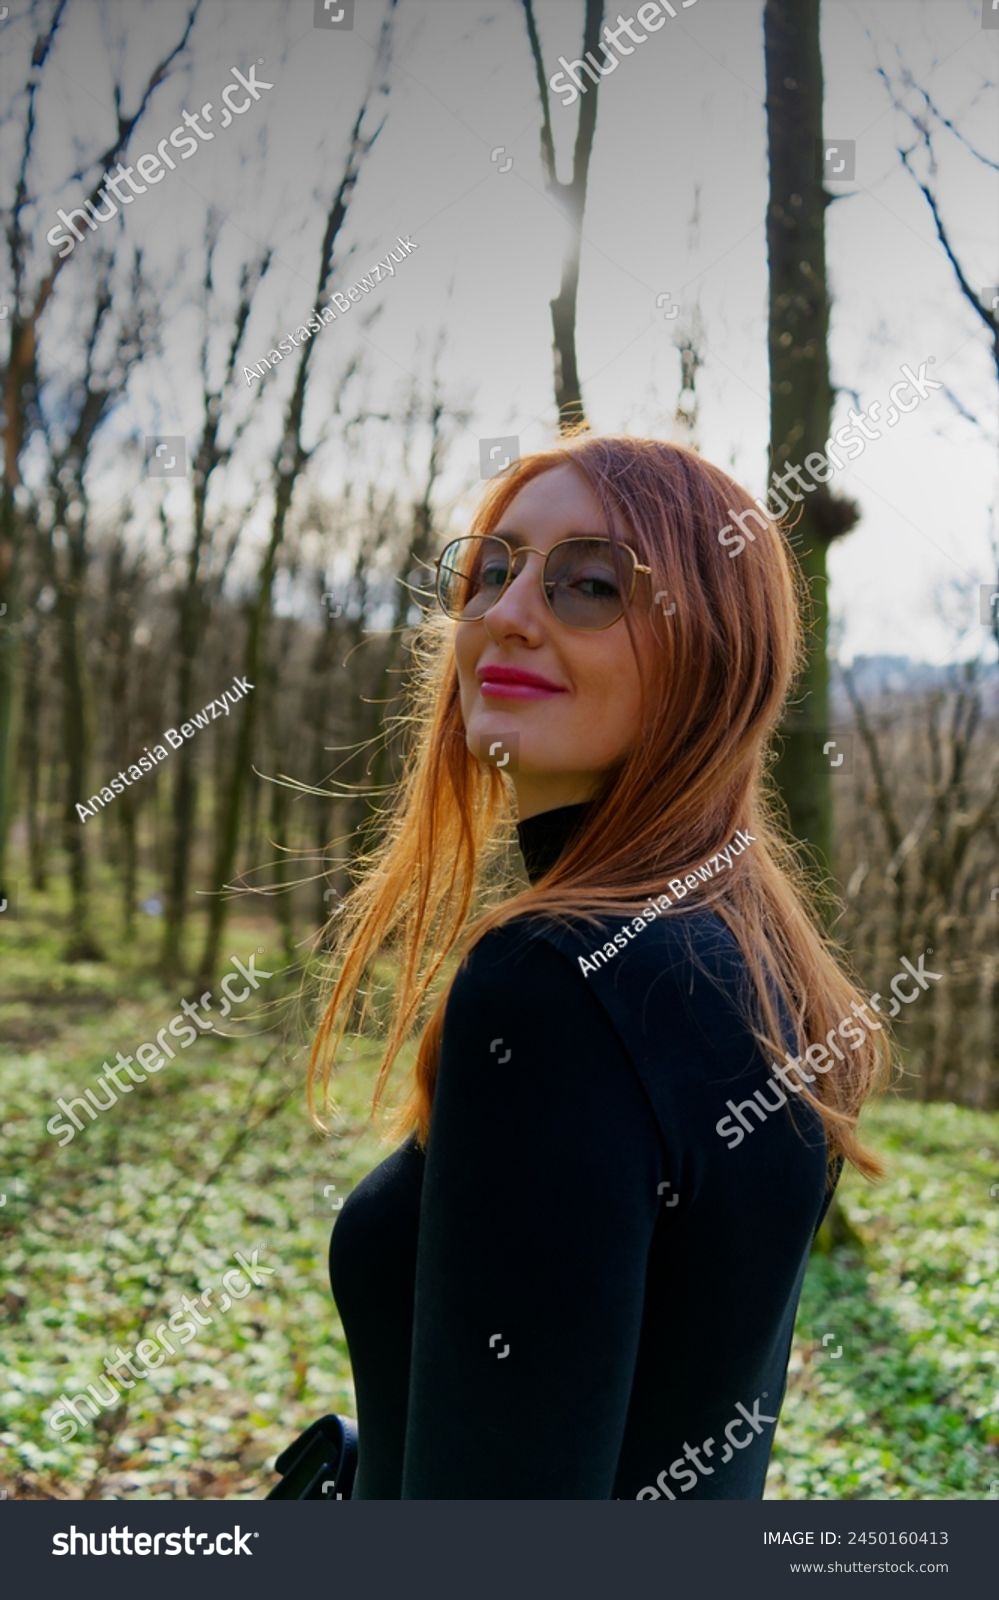 A person with obscured face stands amidst a serene forest, the sunlight filtering through bare trees creates a peaceful atmosphere, highlighting the individual’s red hair.  #2450160413